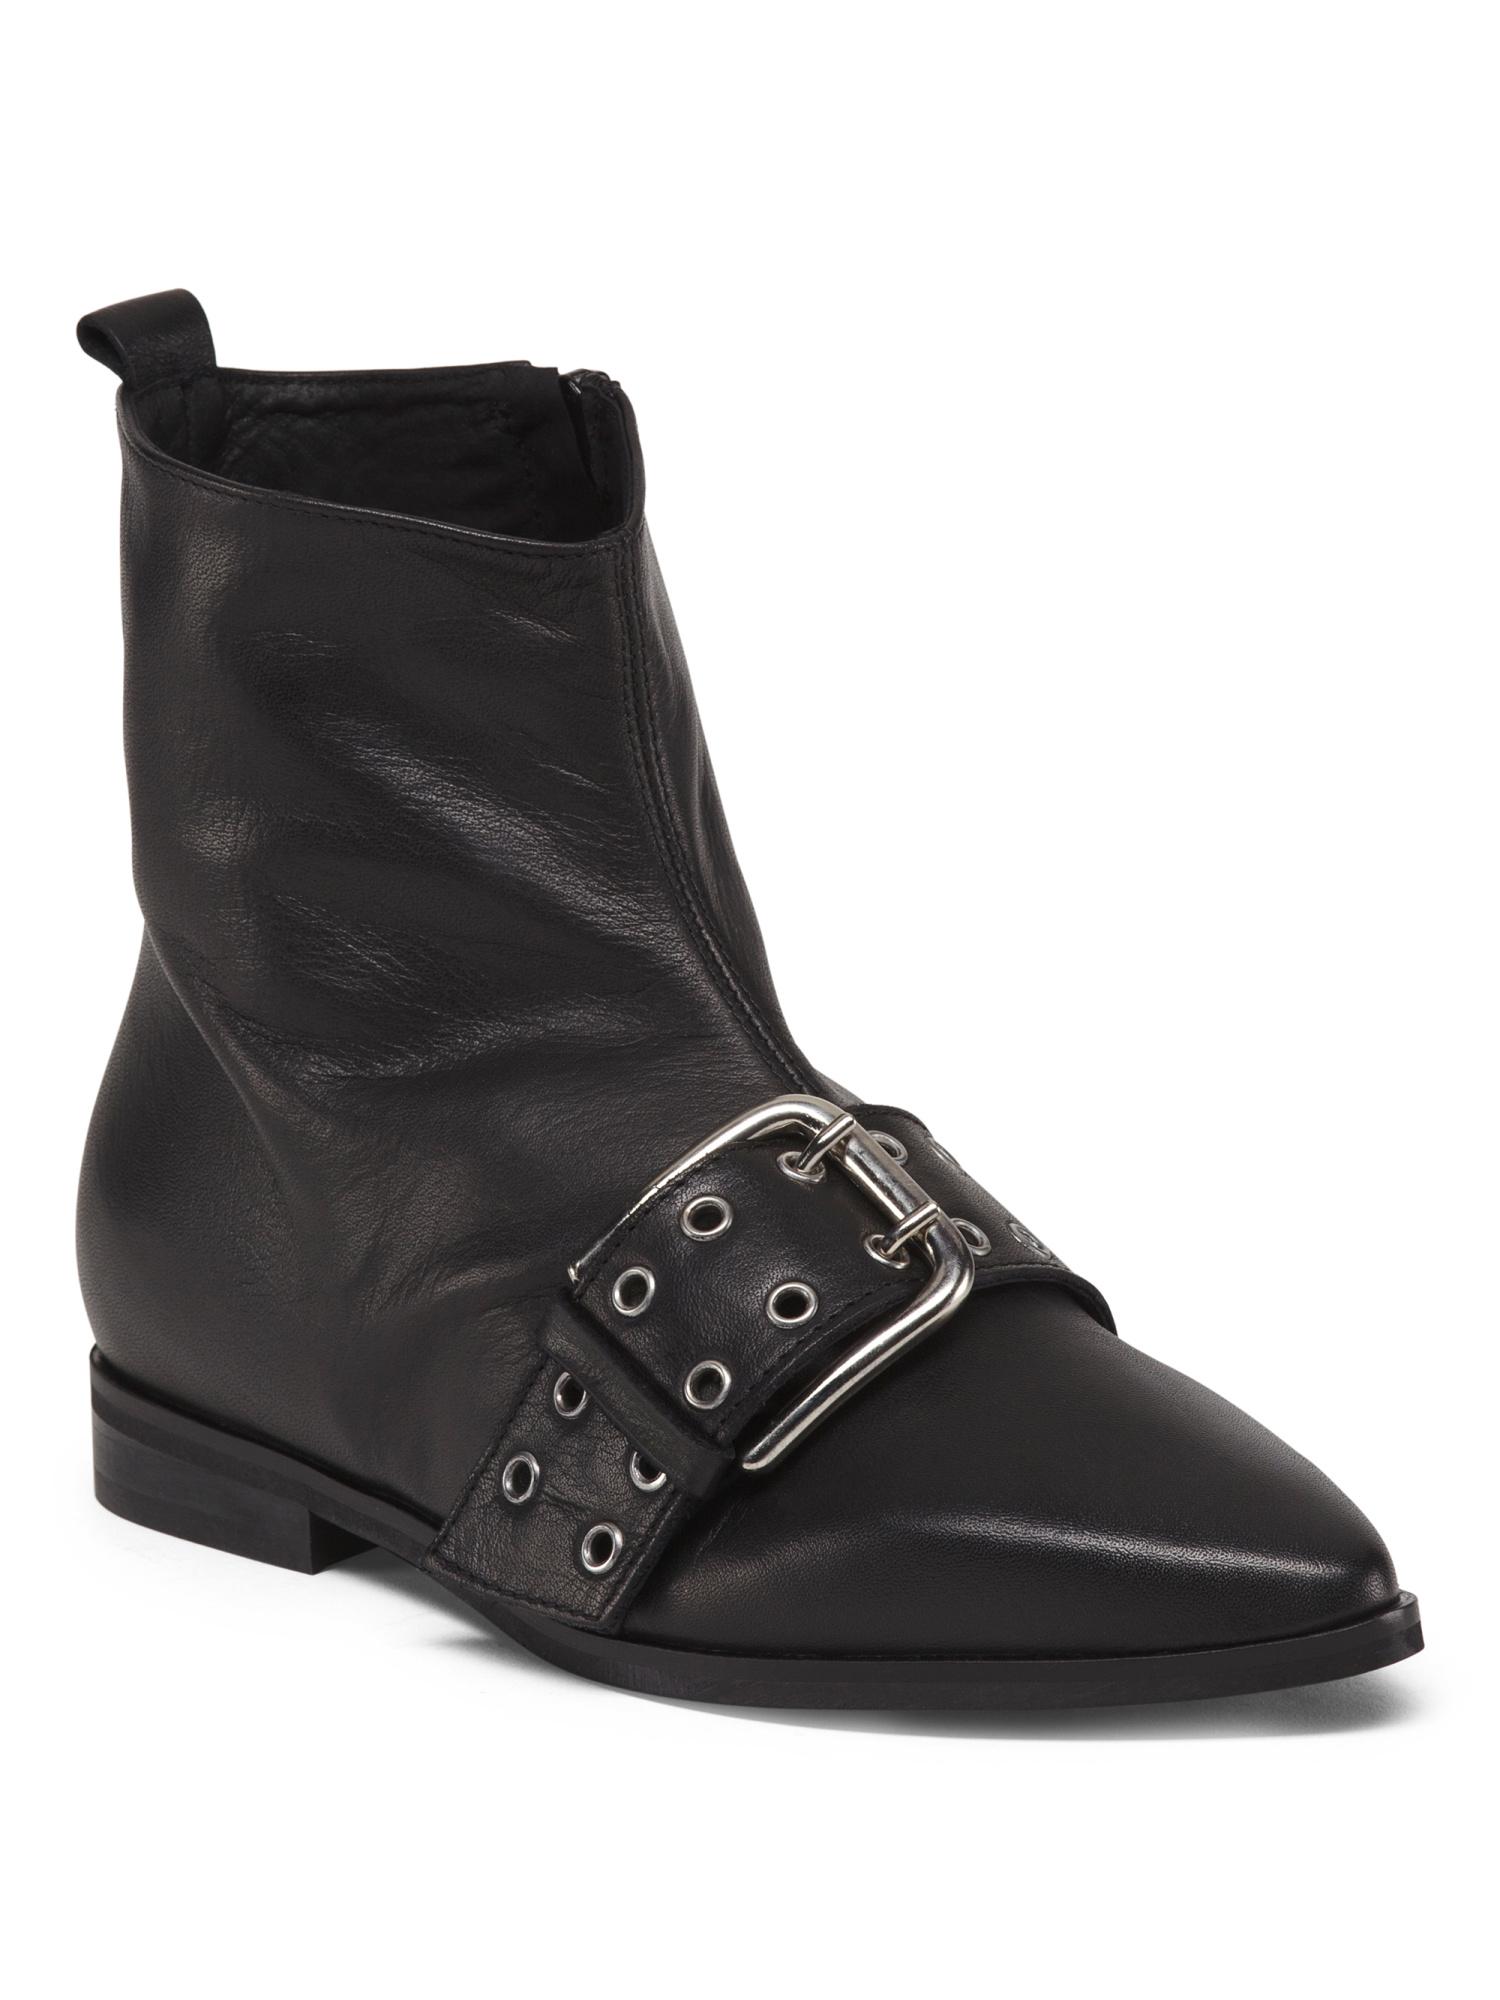 Tj Maxx Made In Italy Leather Pointy Toe Buckle Boots in